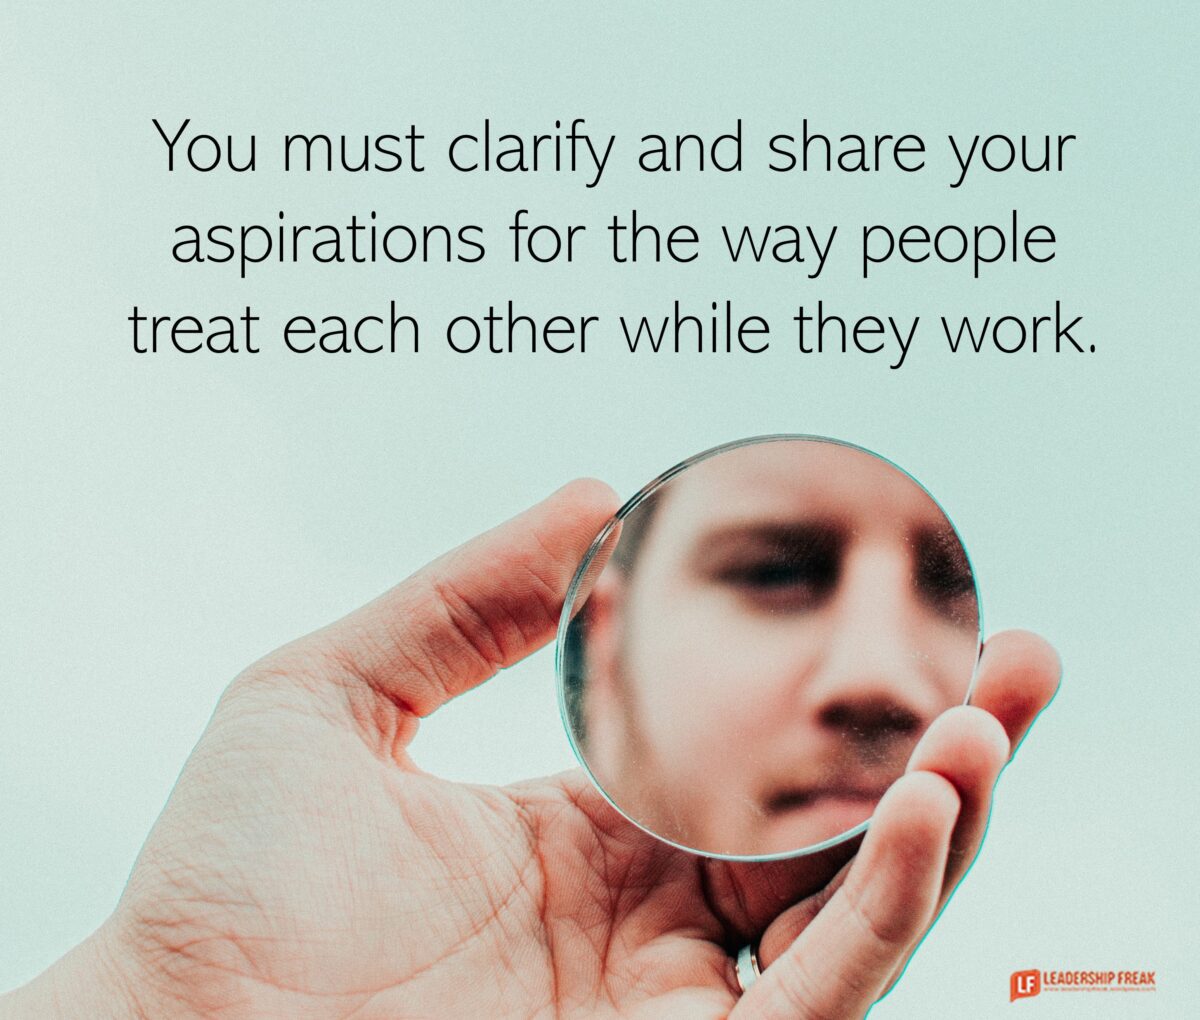 How to Clarify and Share Your Aspirations for the Way People Treat Each Other at Work